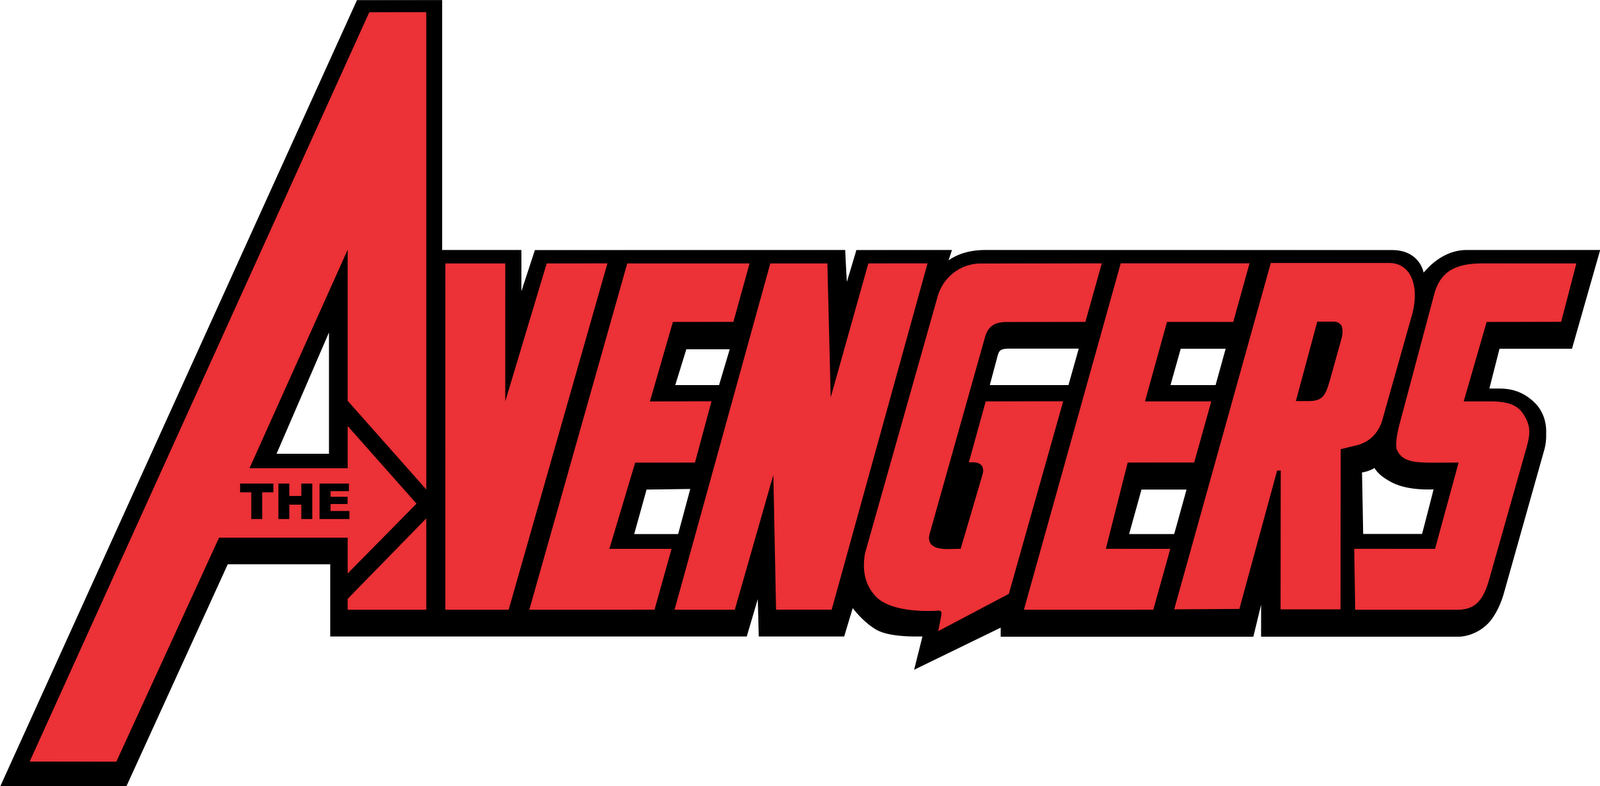 File:The avengers logo.png